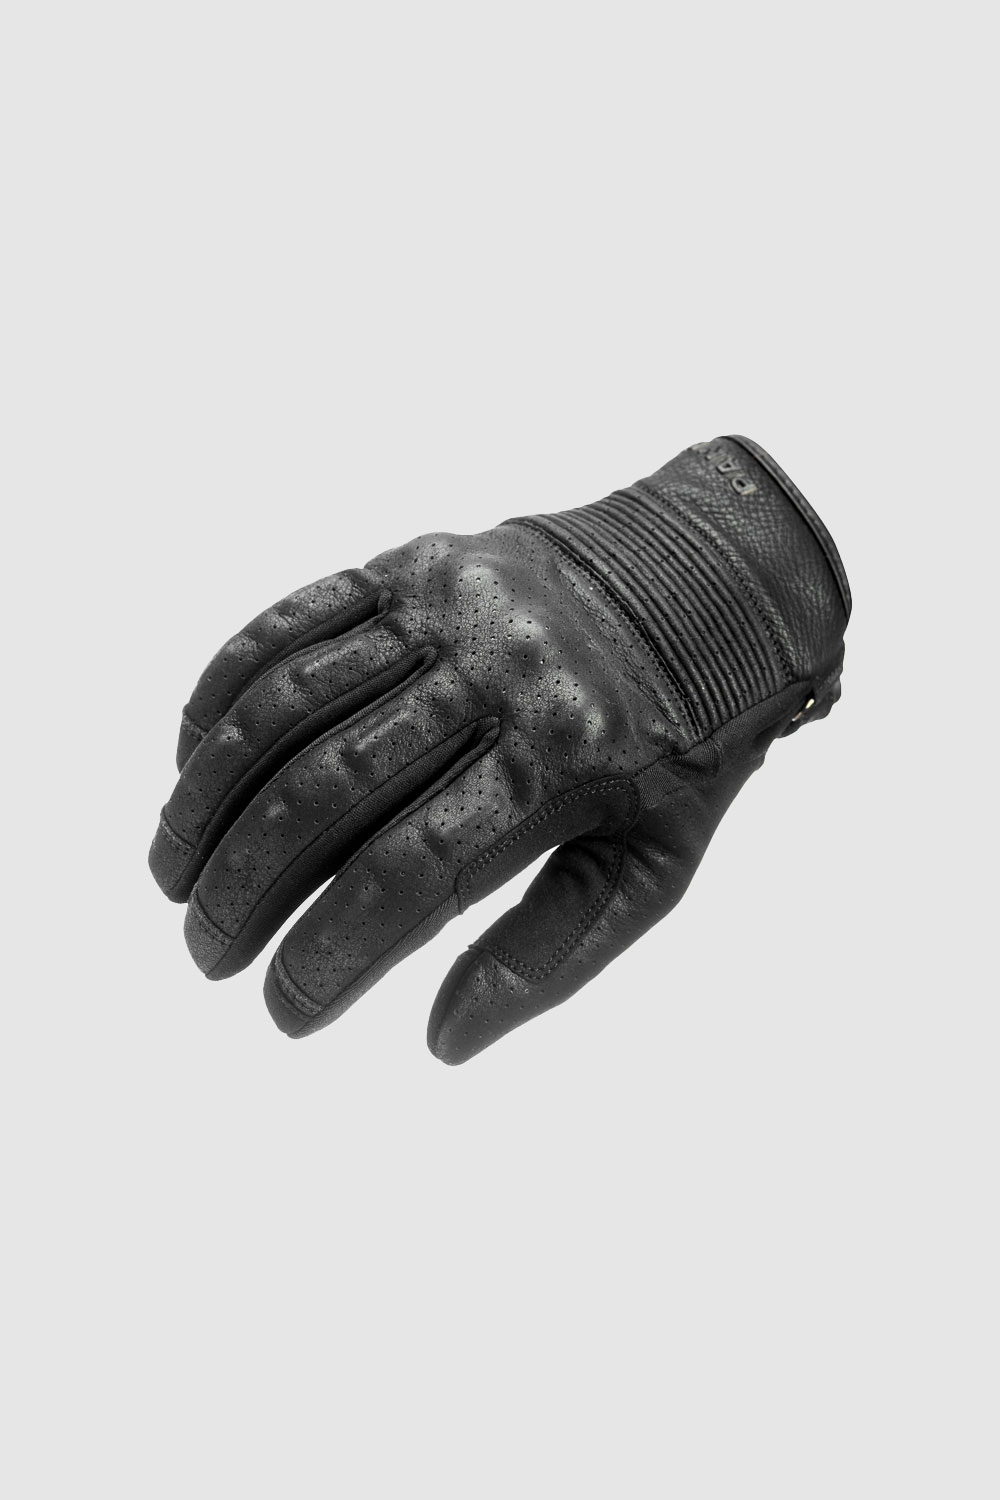 Men's/Women's Hard Knuckle Street-Style Leather Motorcycle Gloves various sizes 